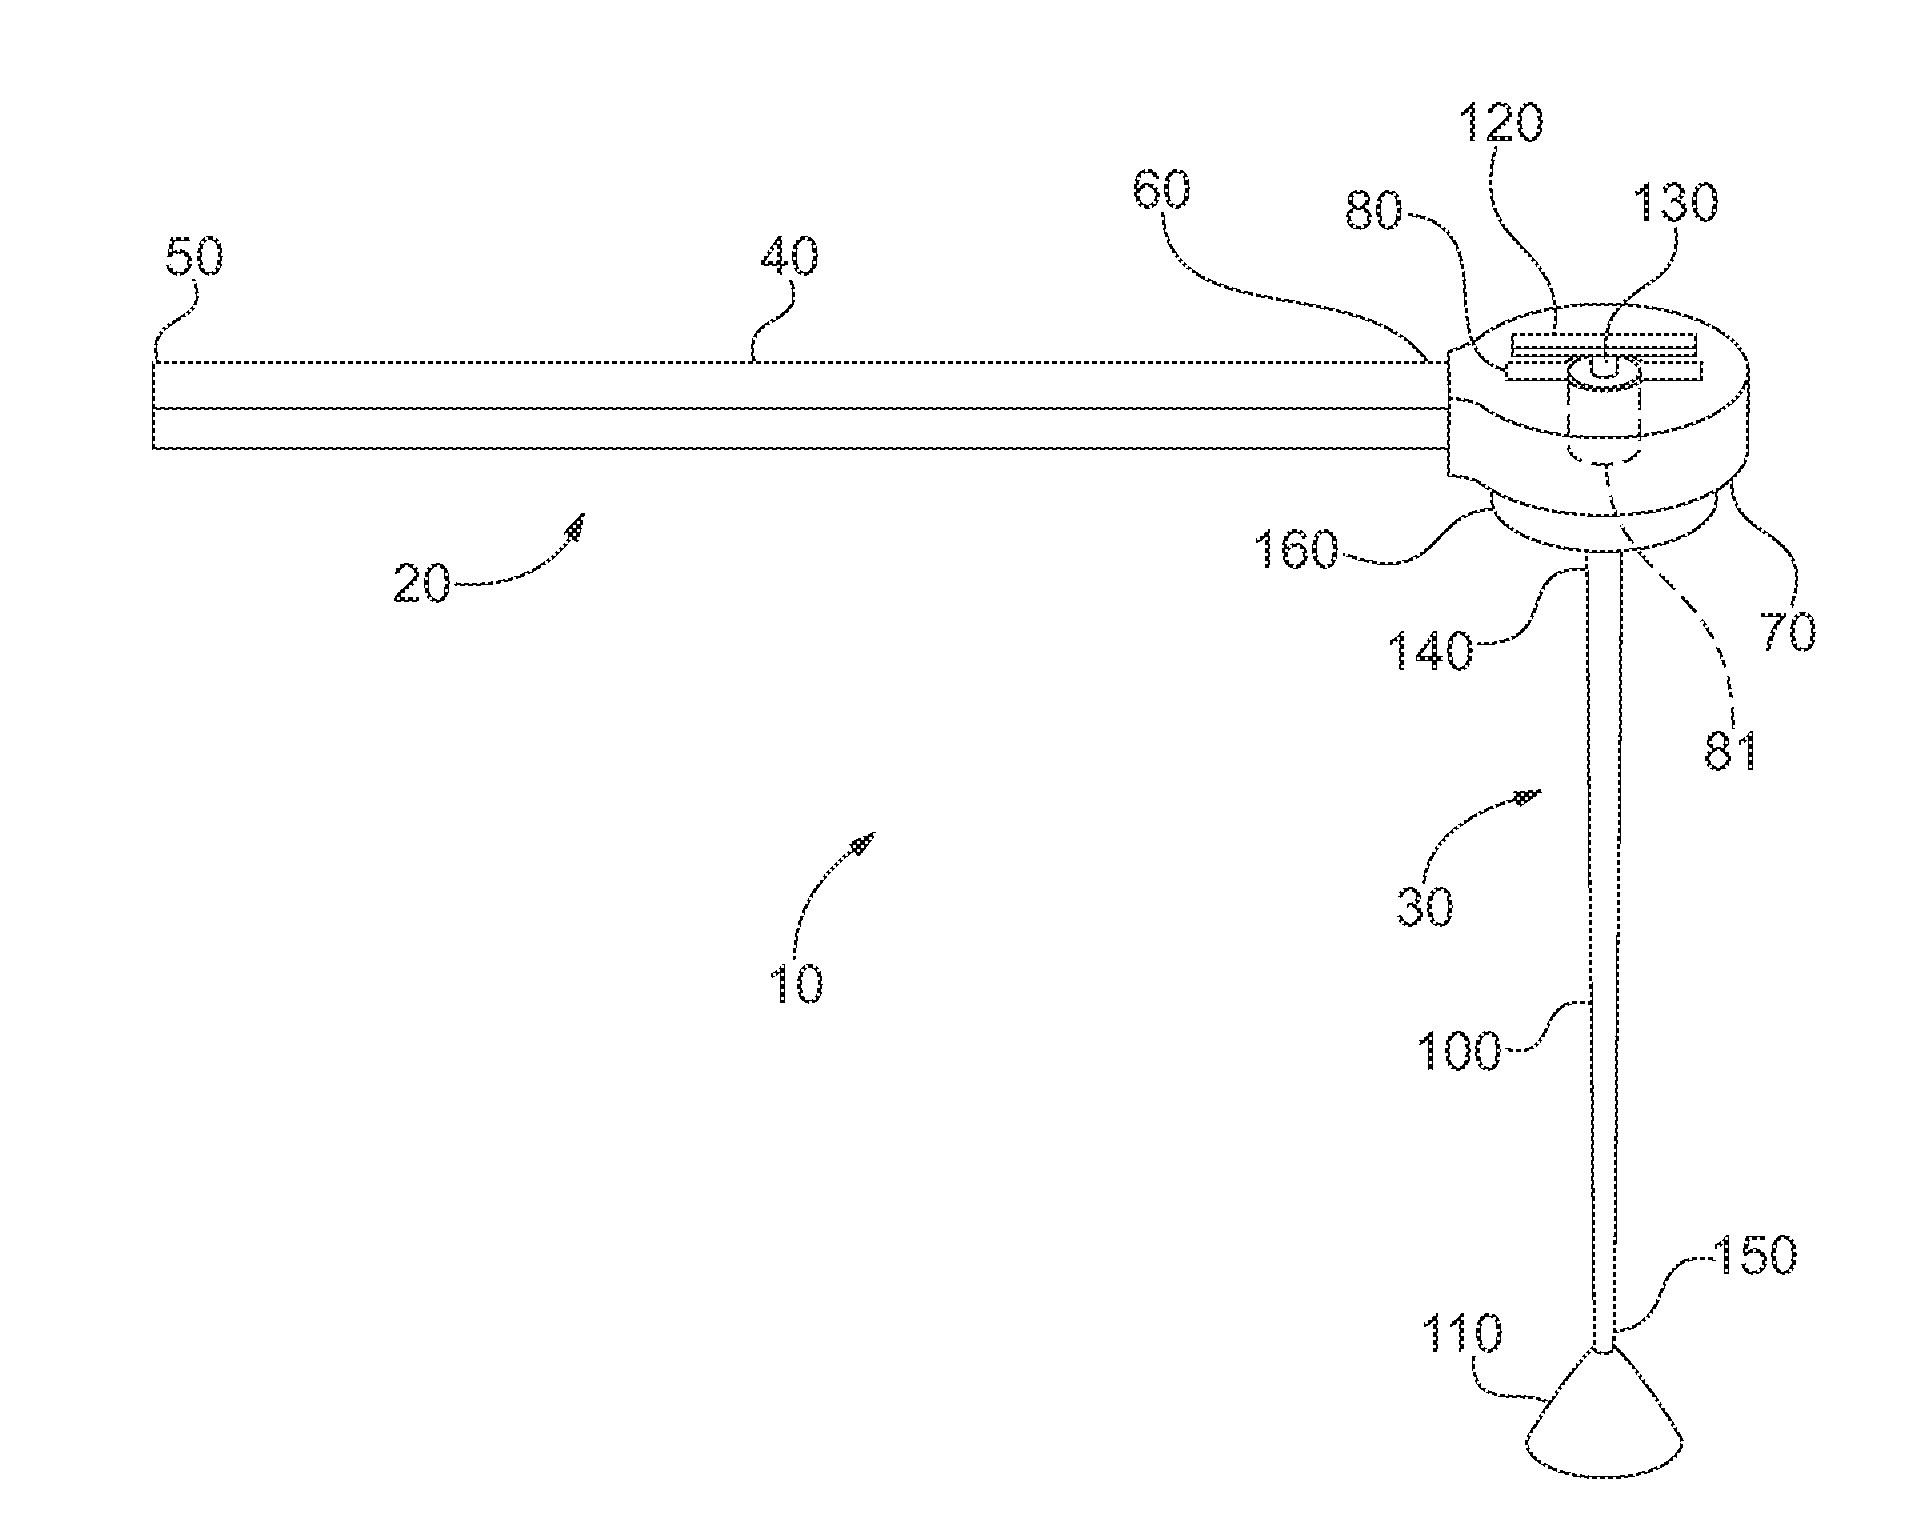 Cell culture scraping device